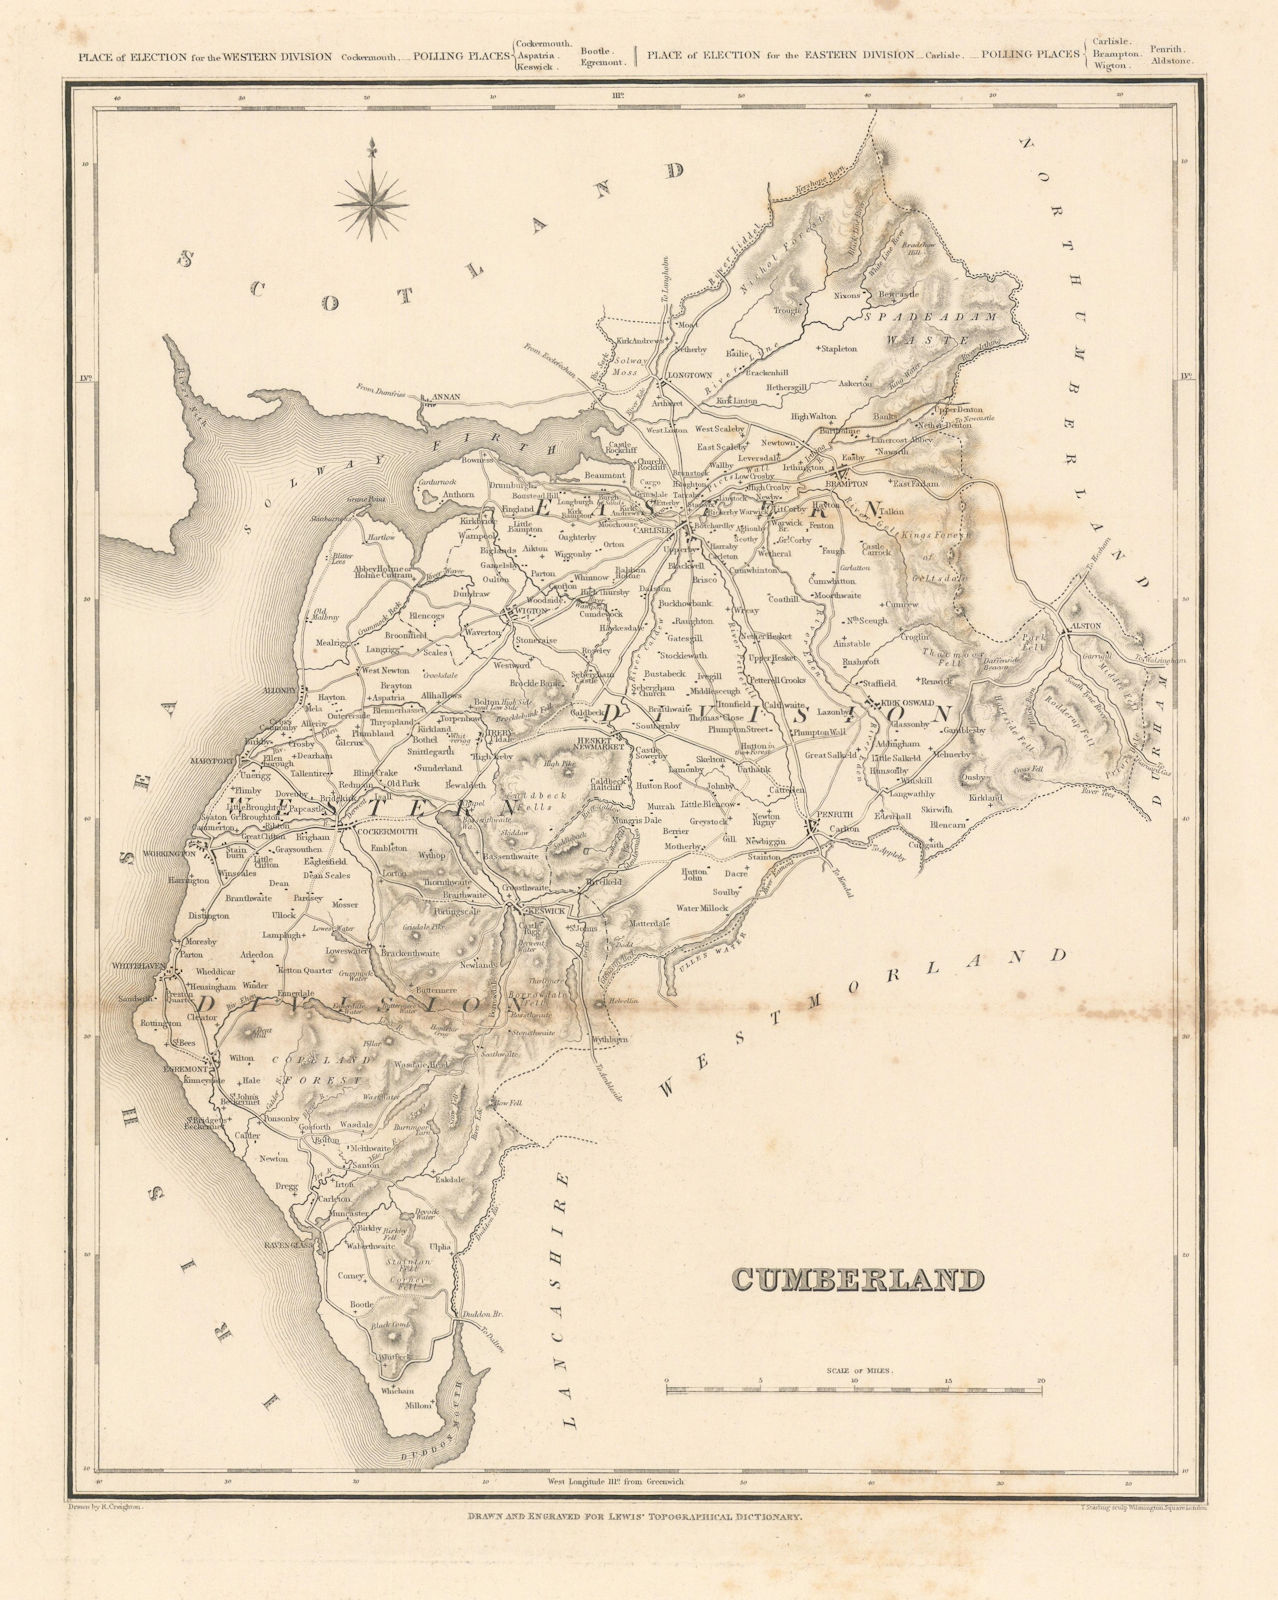 Associate Product Antique county map of CUMBERLAND / Cumbria by Starling, Creighton & Lewis c1840